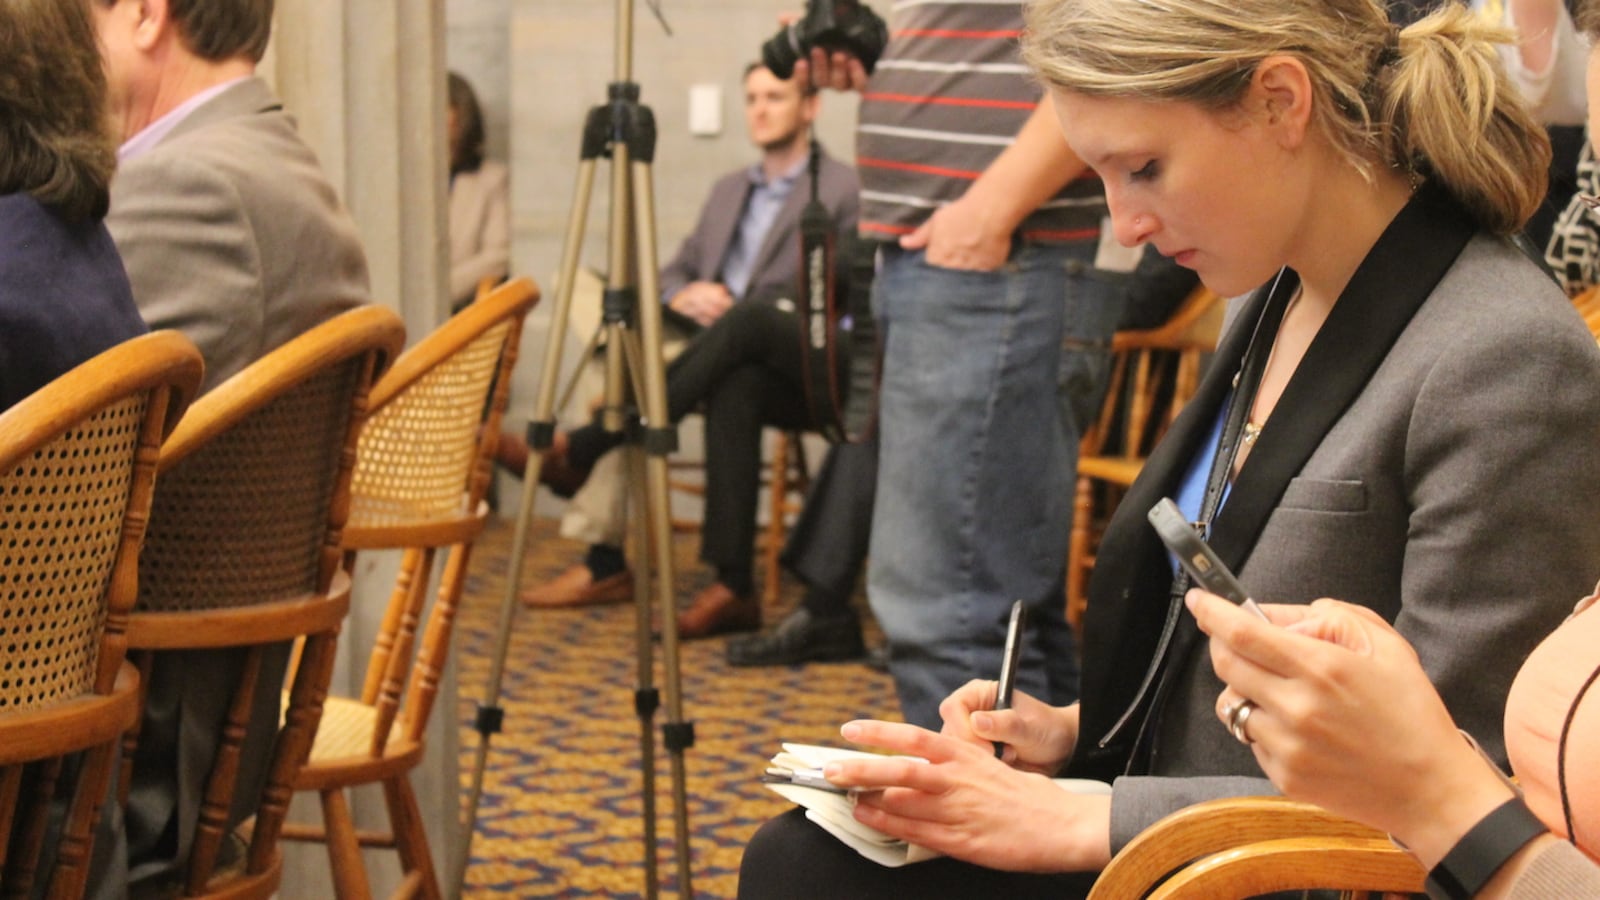 Grace Tatter covers a press conference at the Tennessee State Capitol in 2015.